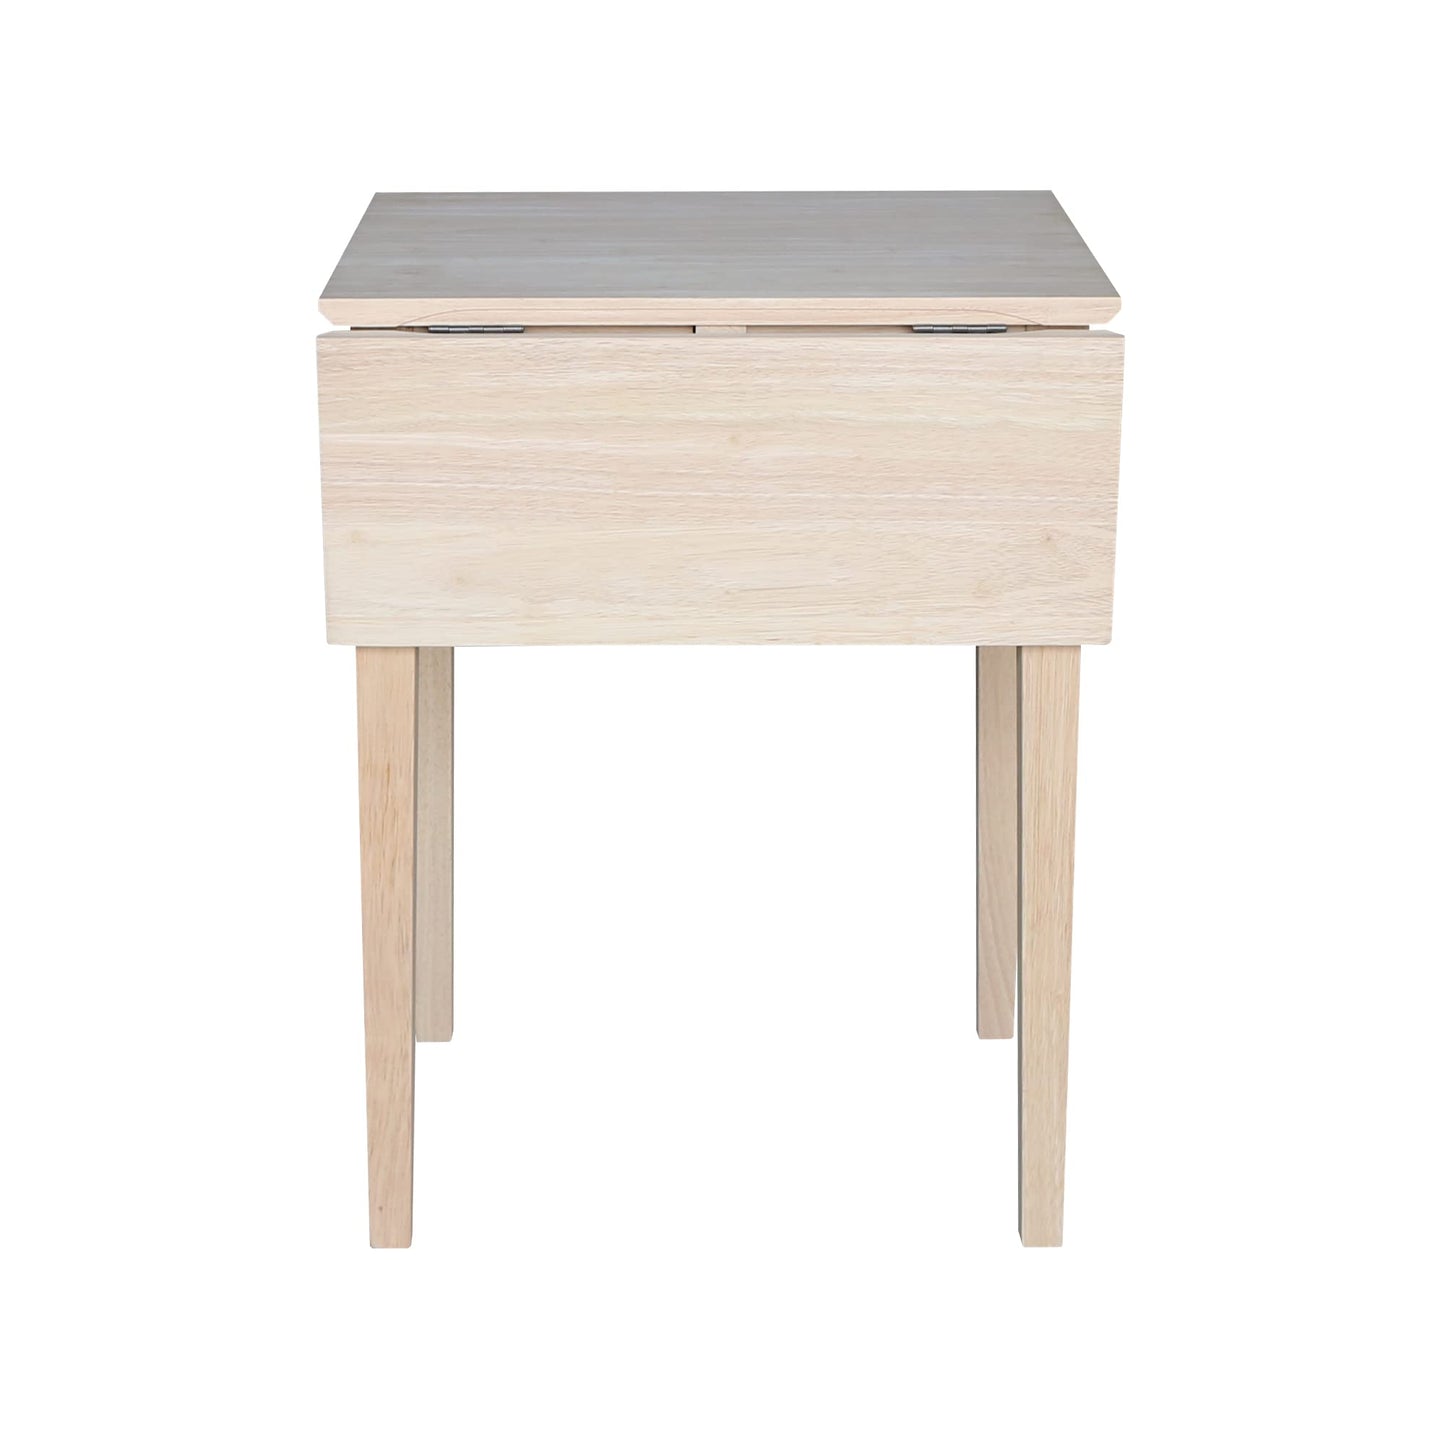 International Concepts Small Drop-leaf Table, Unfinished